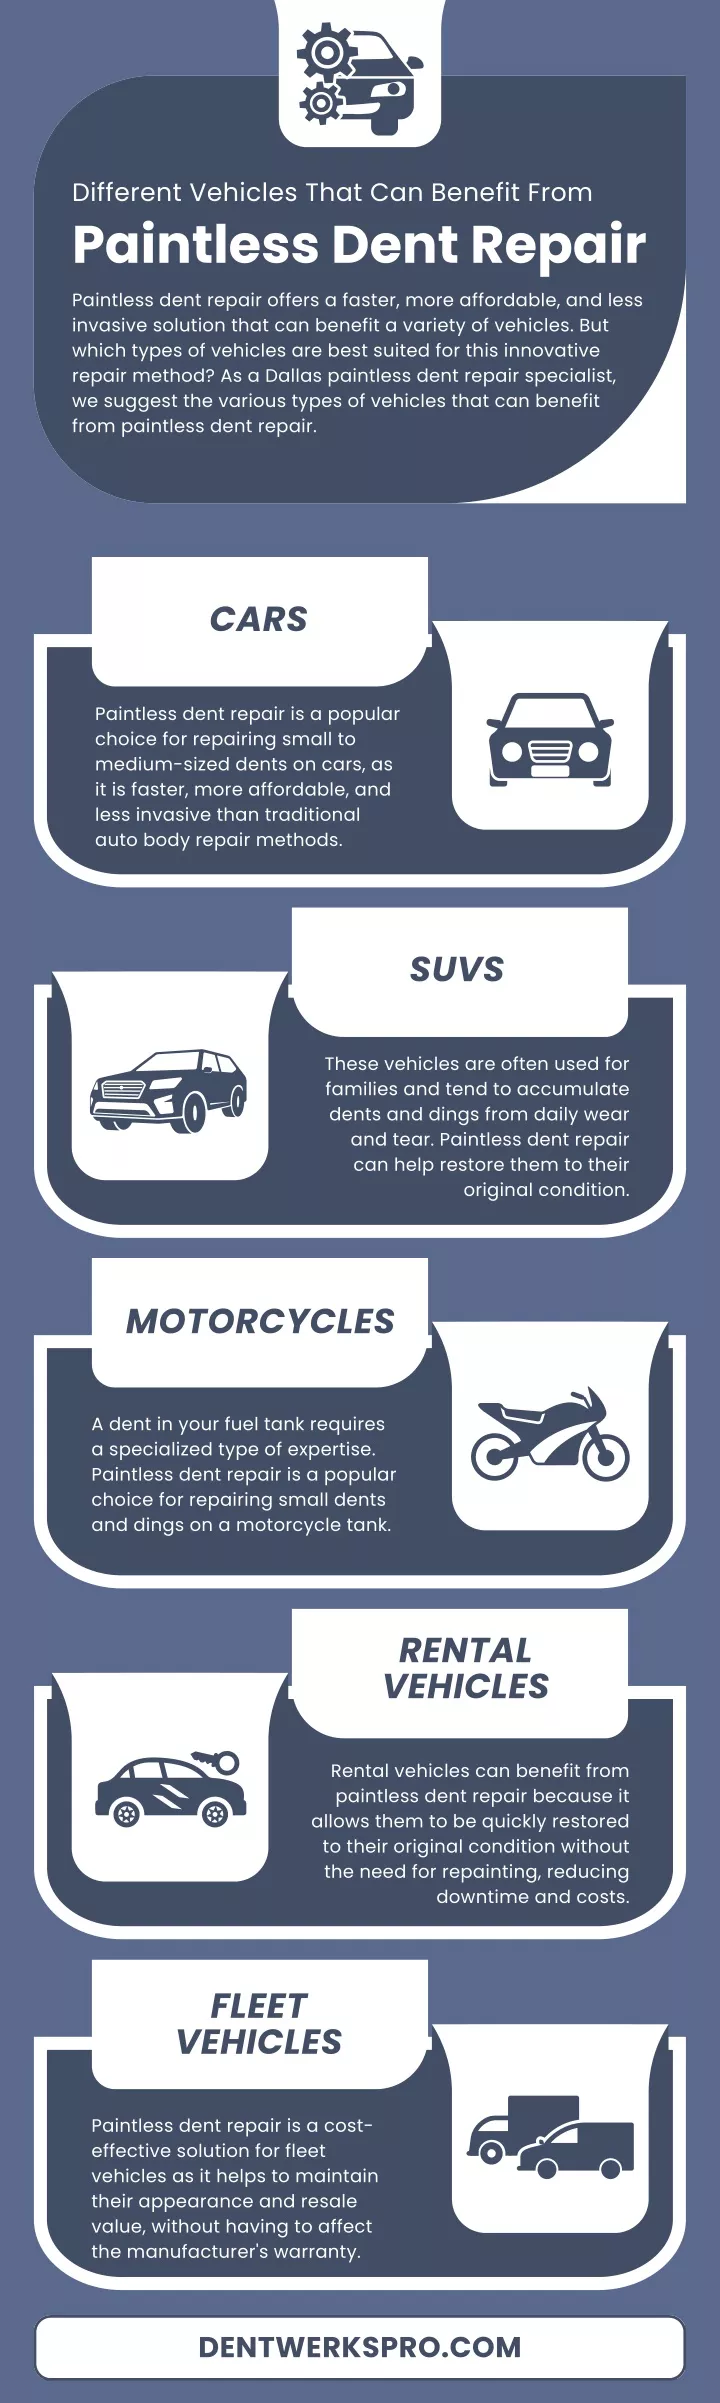 different vehicles that can benefit from